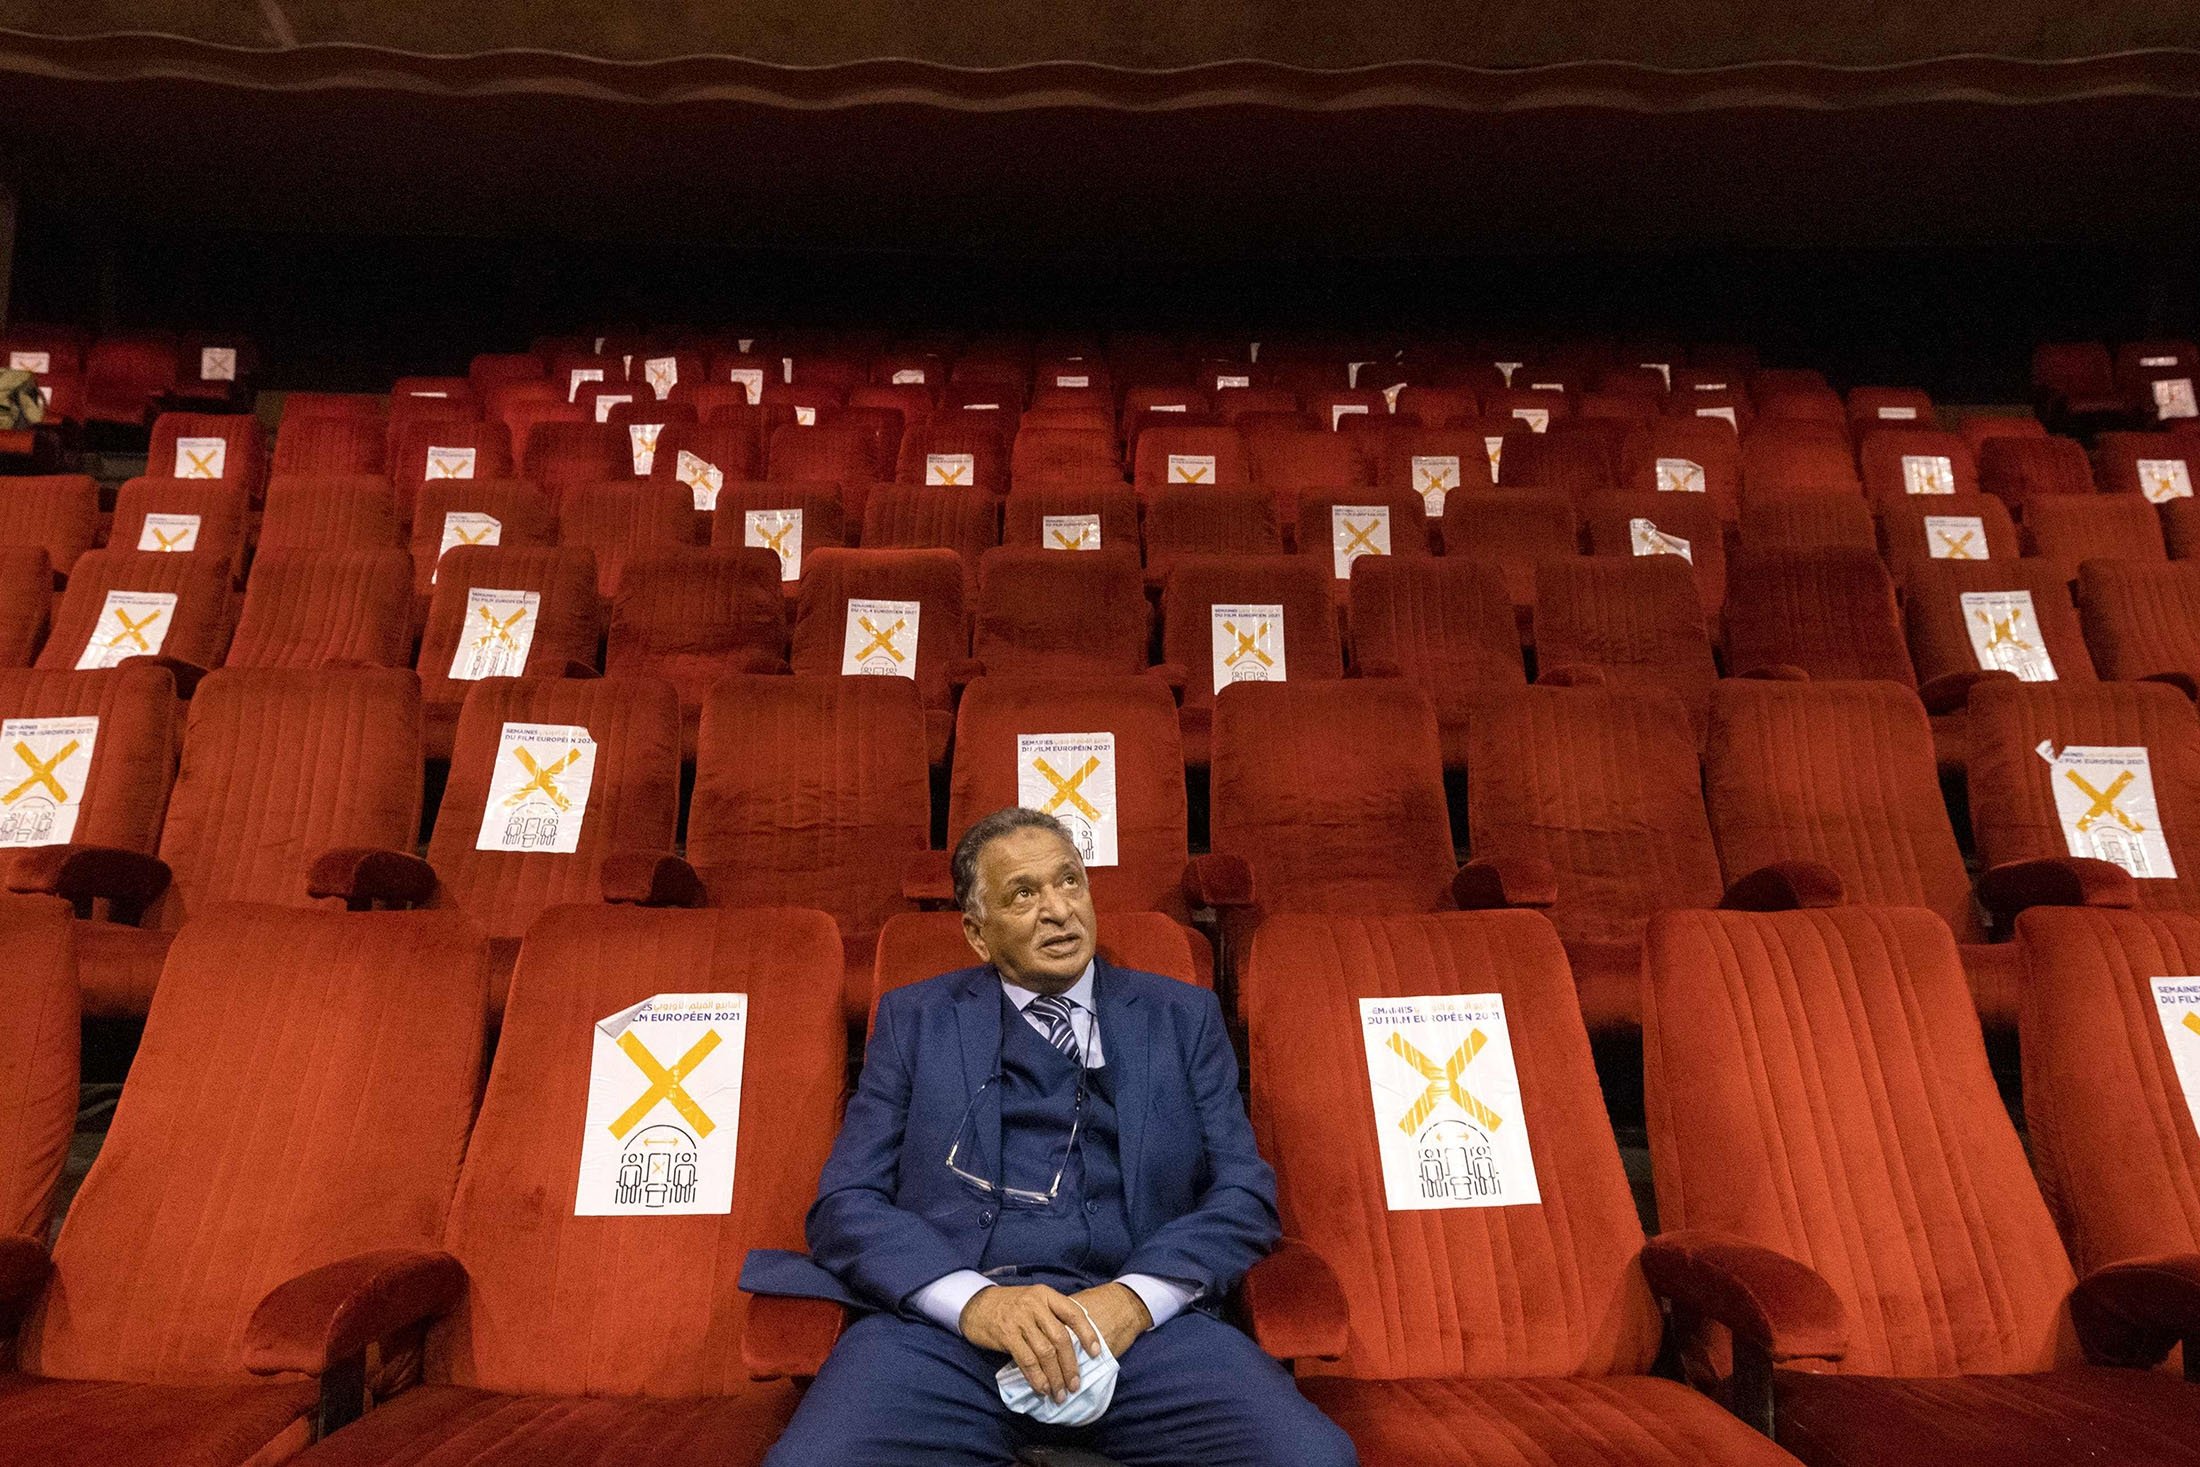 Yahla Yahla, who worked as a projectionist in Morocco for 35 years, visits the empty Le Rif cinema in the western city of Casablanca, Morocco, Jan. 24, 2022. (AFP Photo)